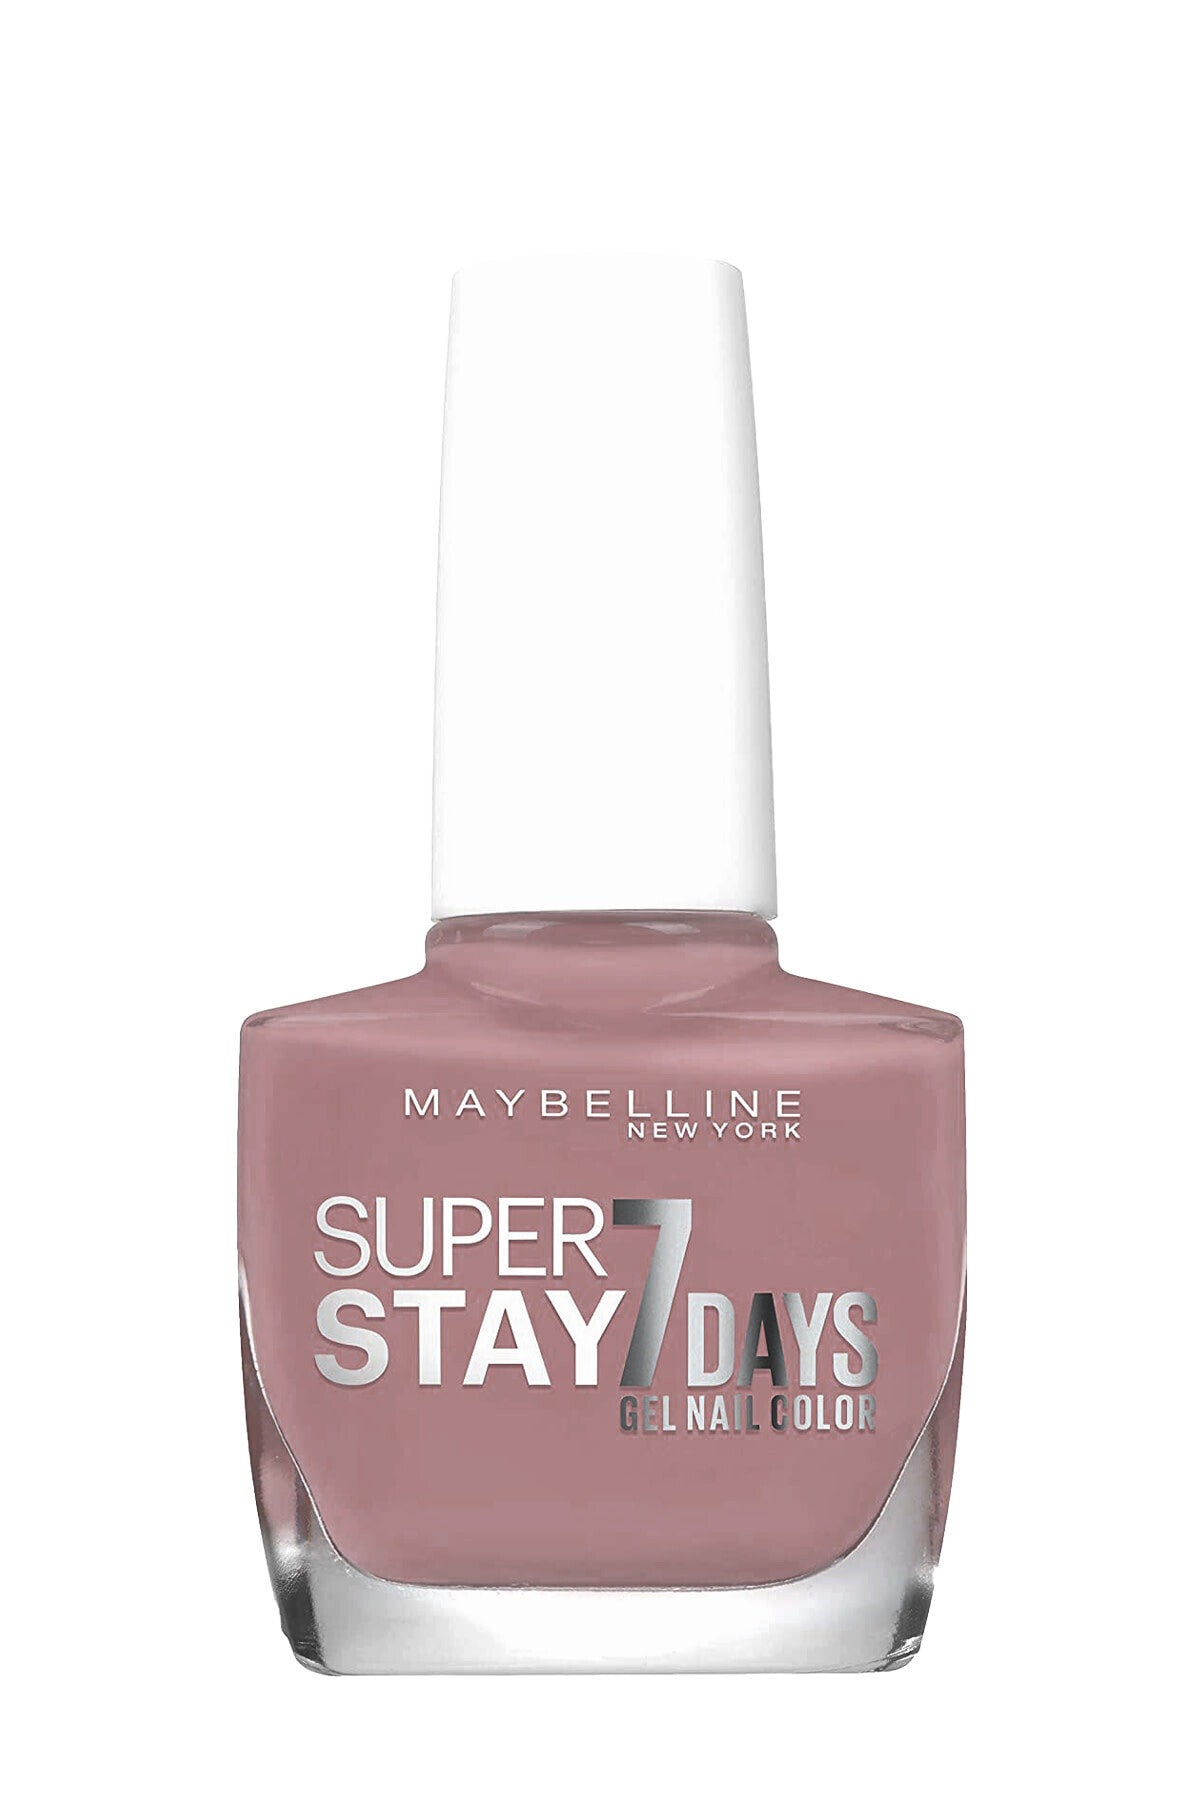 Days Superstay Gel 931 Brownstone — Maybelline Polish Beautynstyle 7 Nail